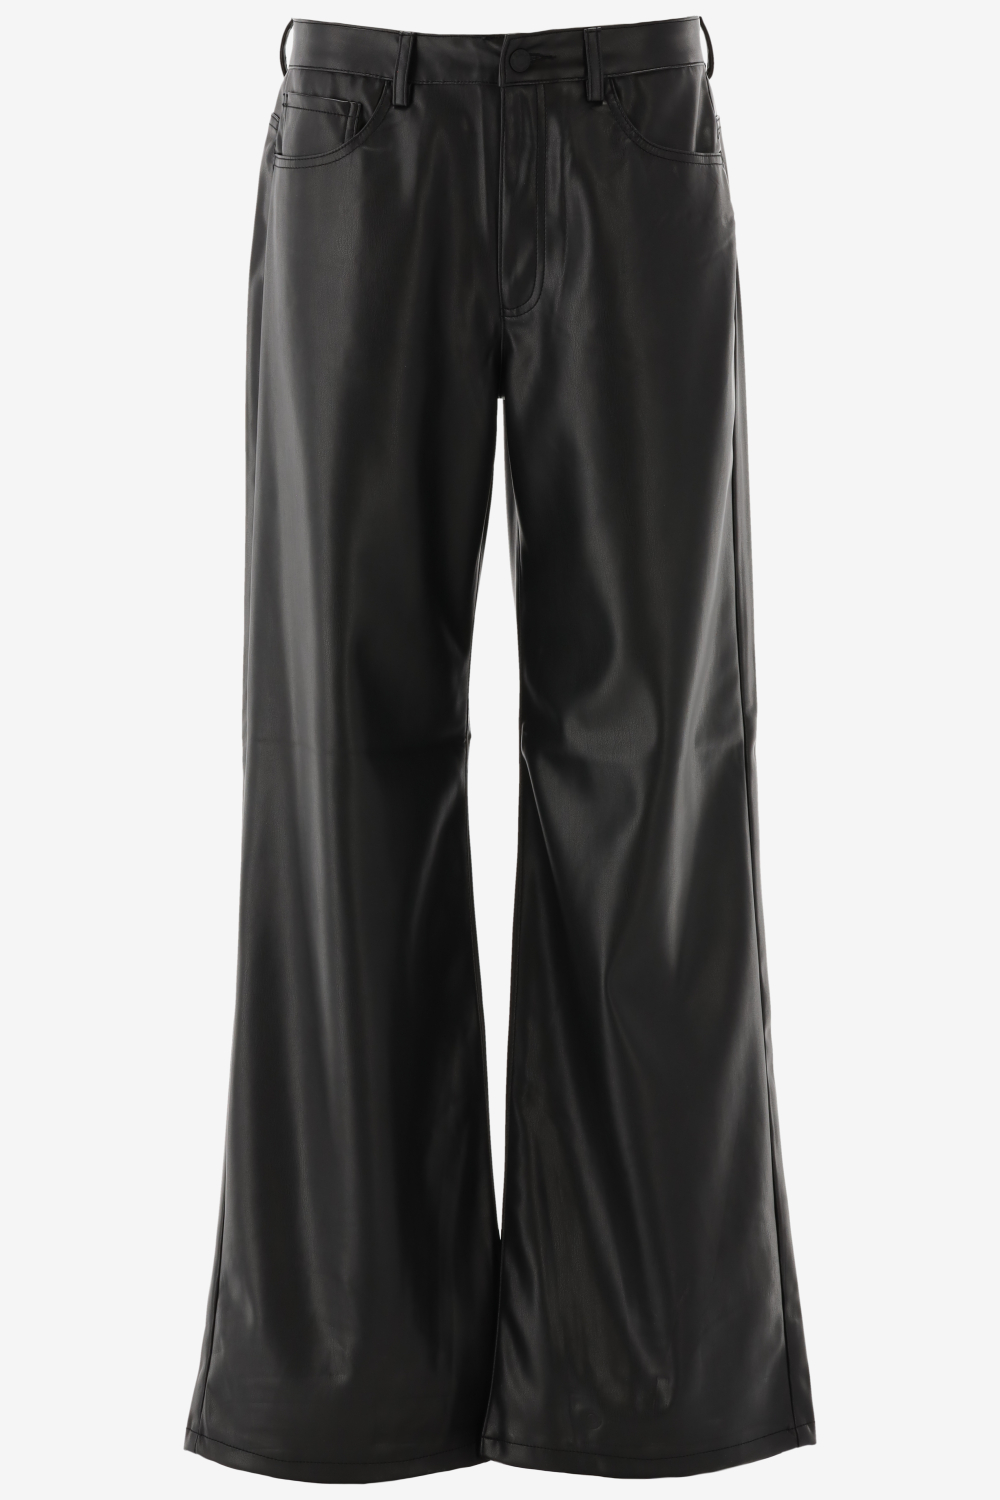 Only ONLMADISON HW WIDE FX LEATH PANT - Blac Black